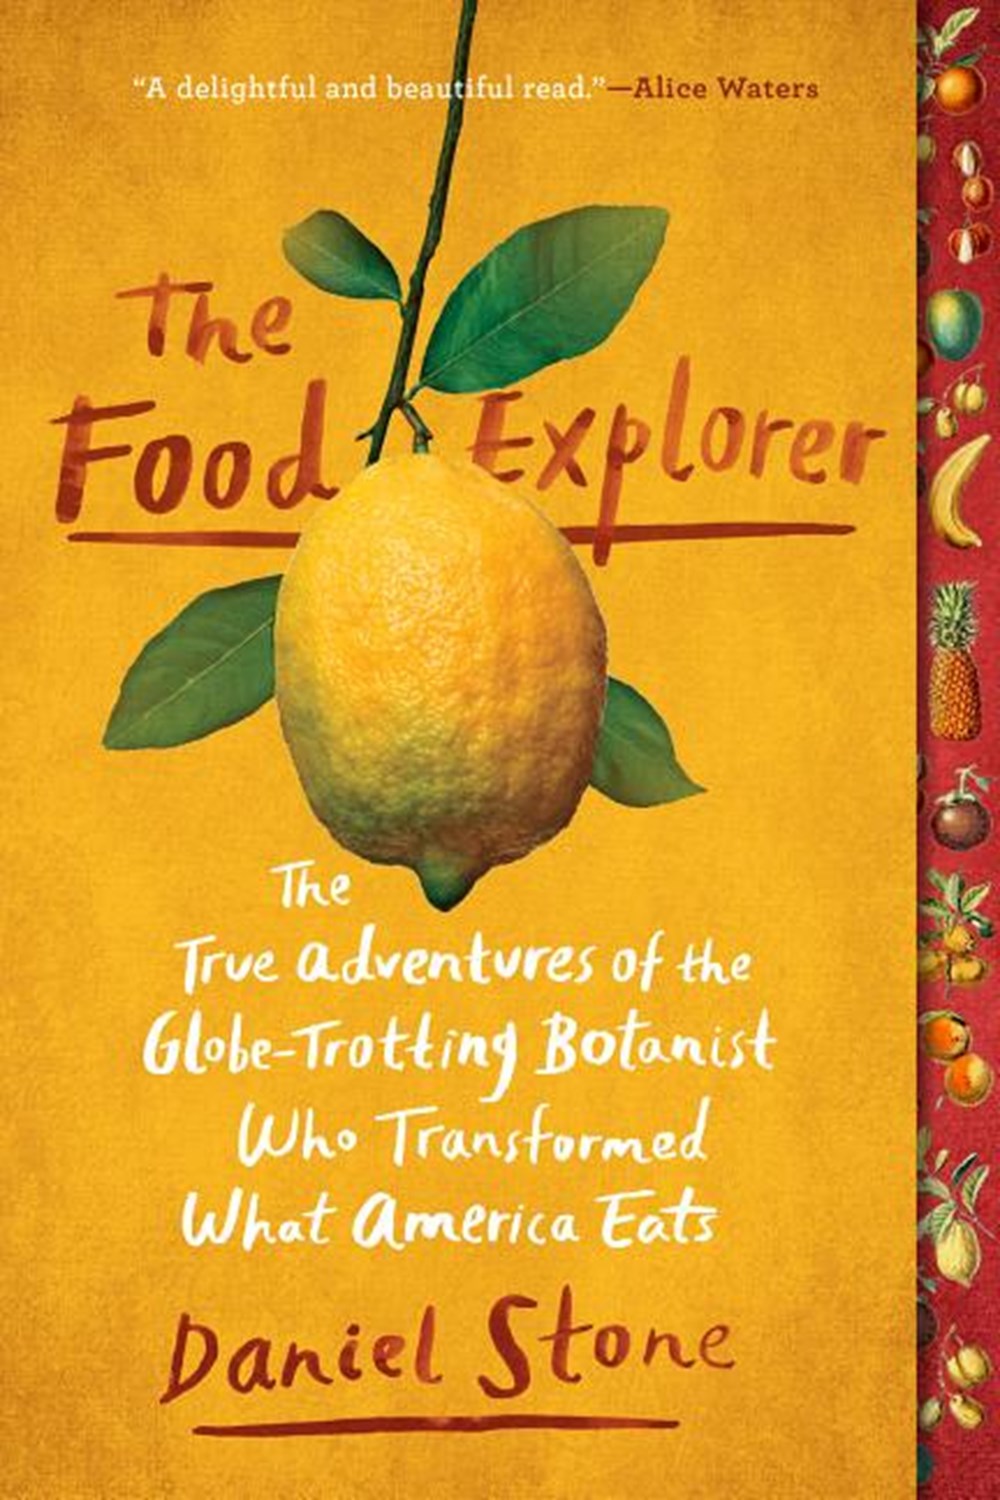 Food Explorer: The True Adventures of the Globe-Trotting Botanist Who Transformed What America Eats